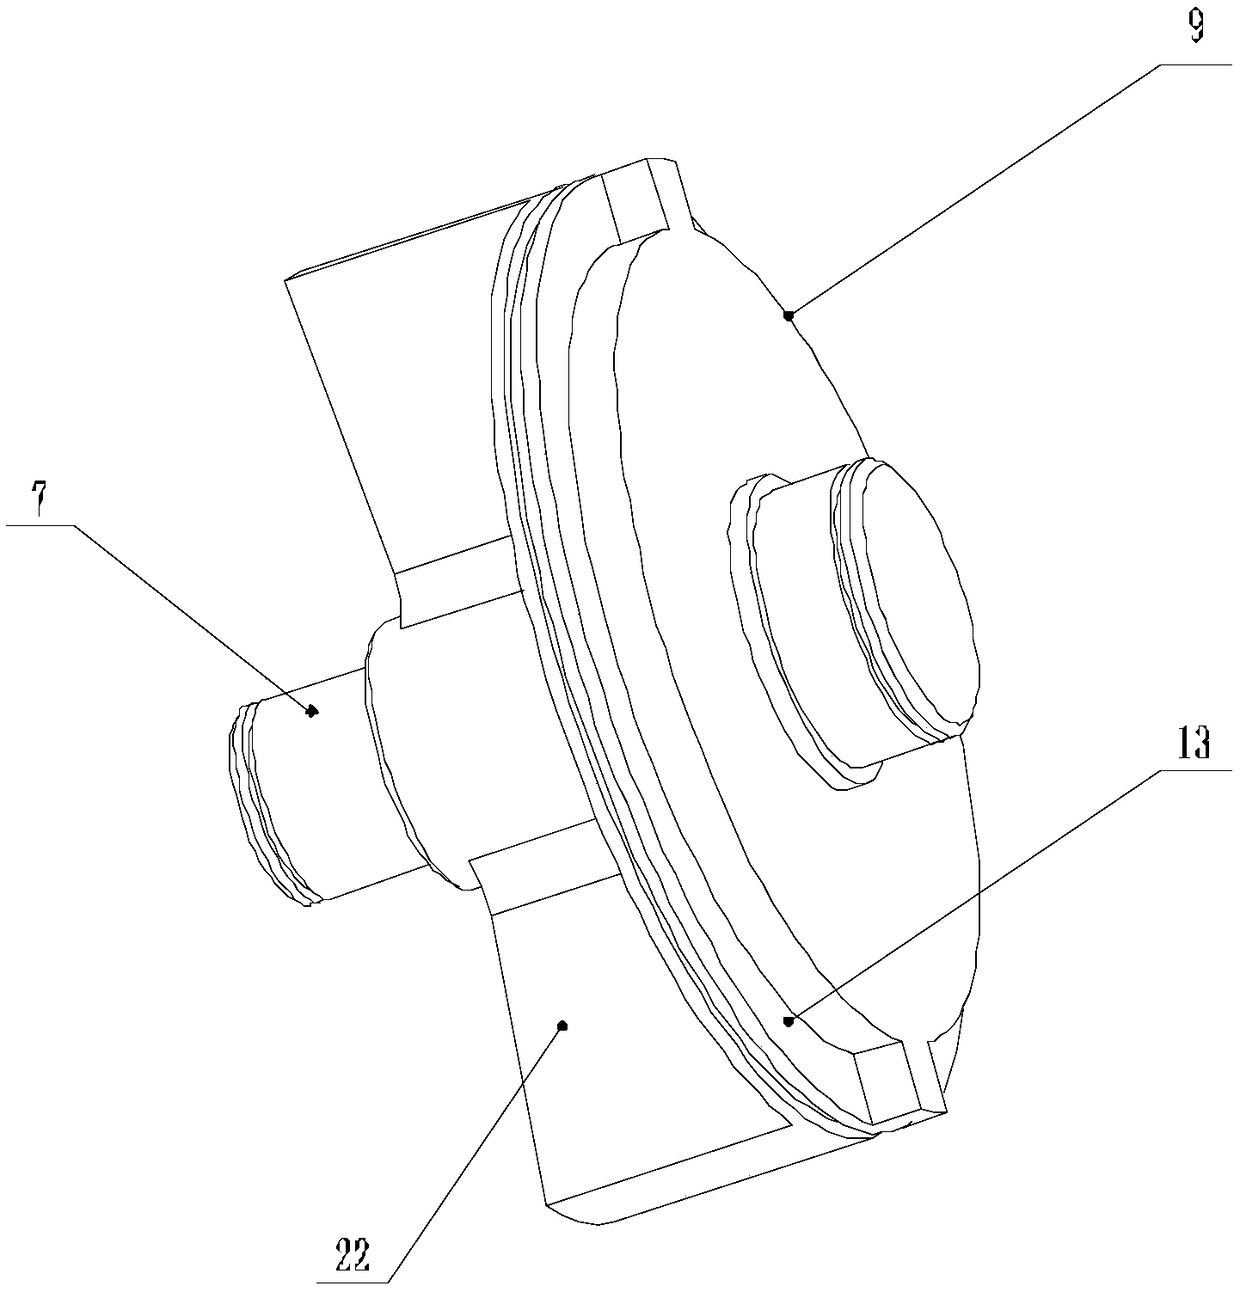 Flexible manipulator joint device with controllable damping and stiffness